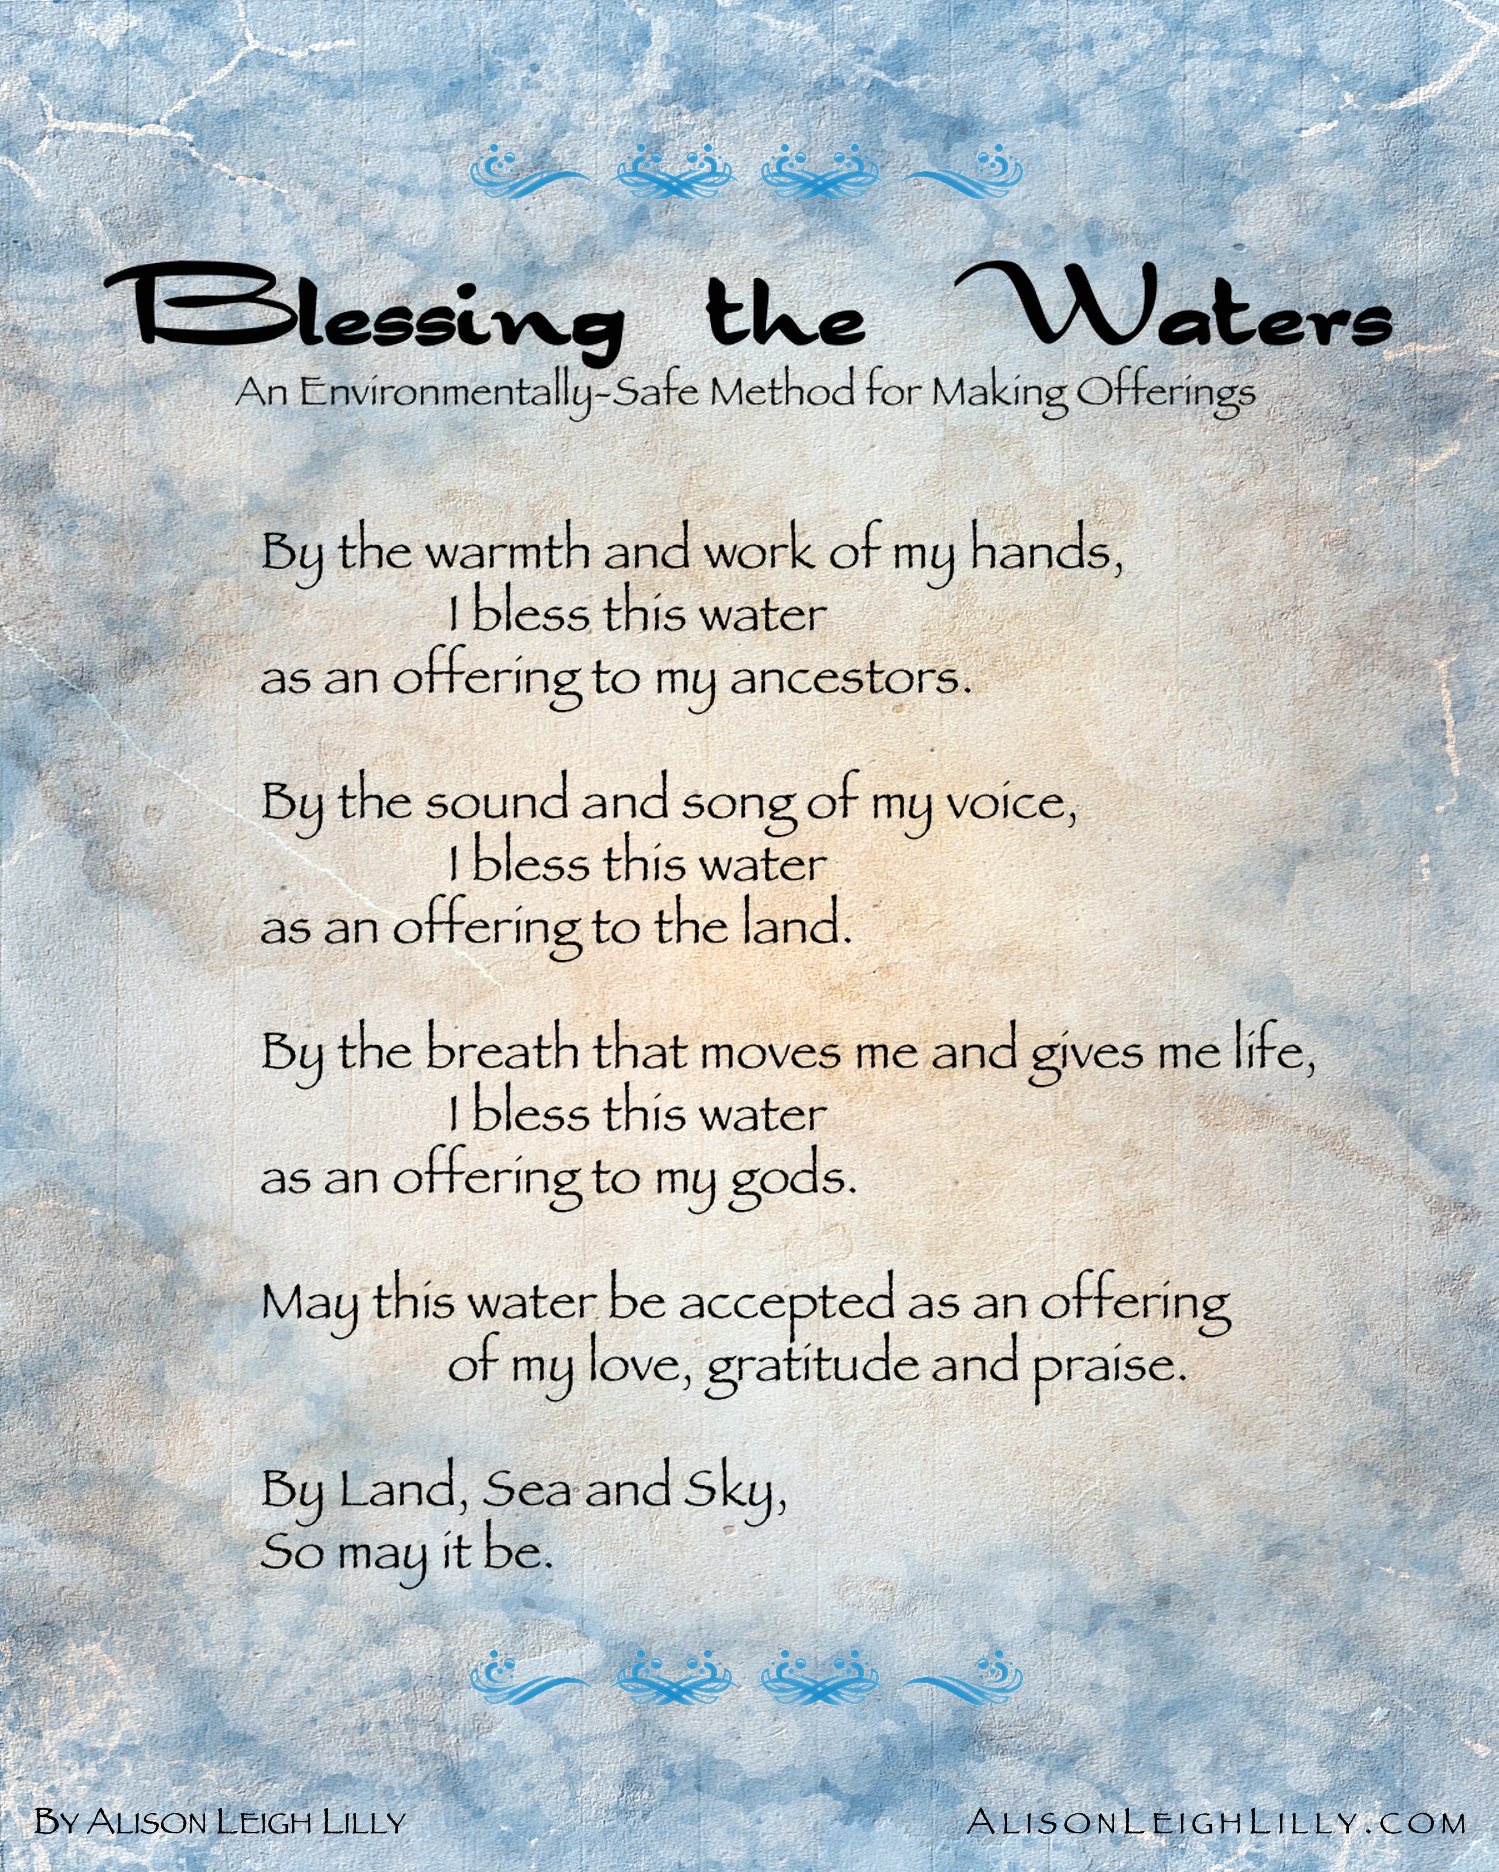 Blessing the Waters, An Environmentally-Safe Method for Making Offerings, by Alison Leigh Lilly